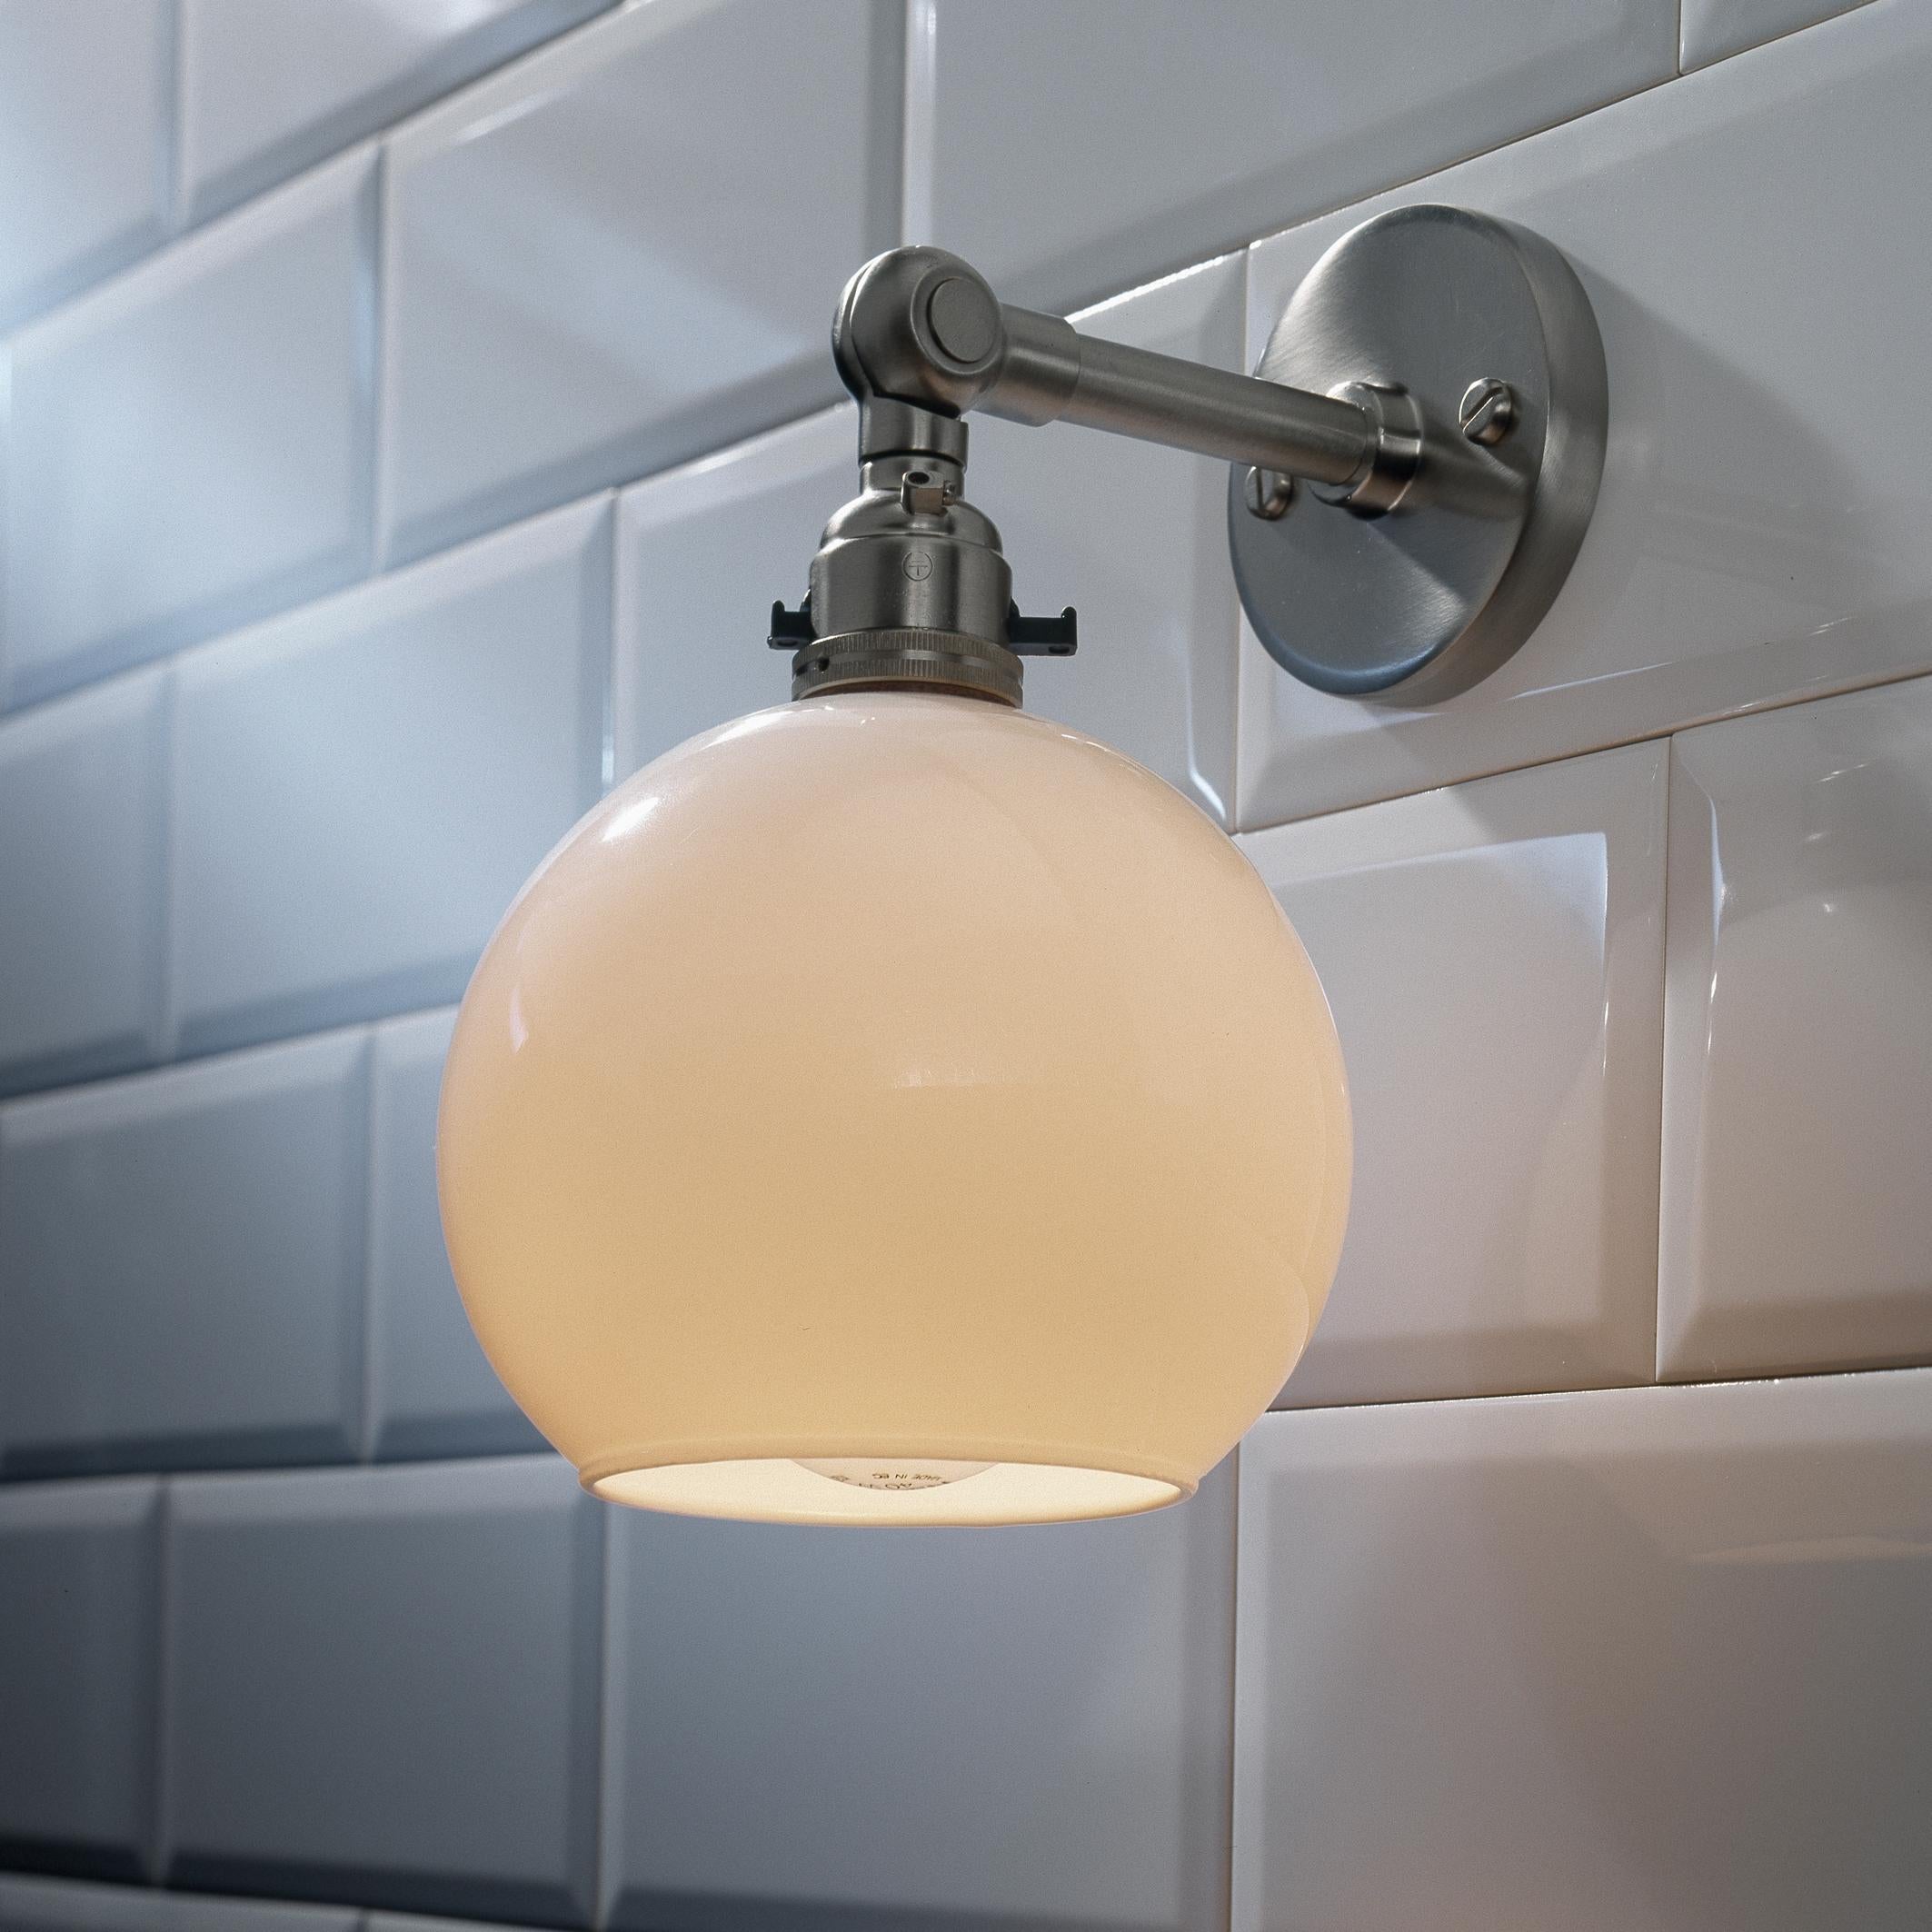 Wall light in brass with adjustable arm, lamp holder B22 with safety switch and spherical opal glass. For indoor use only (IP20).

Lamp LED 230V B22 4W 2700K Retro A60. Main power 230V 50Hz.